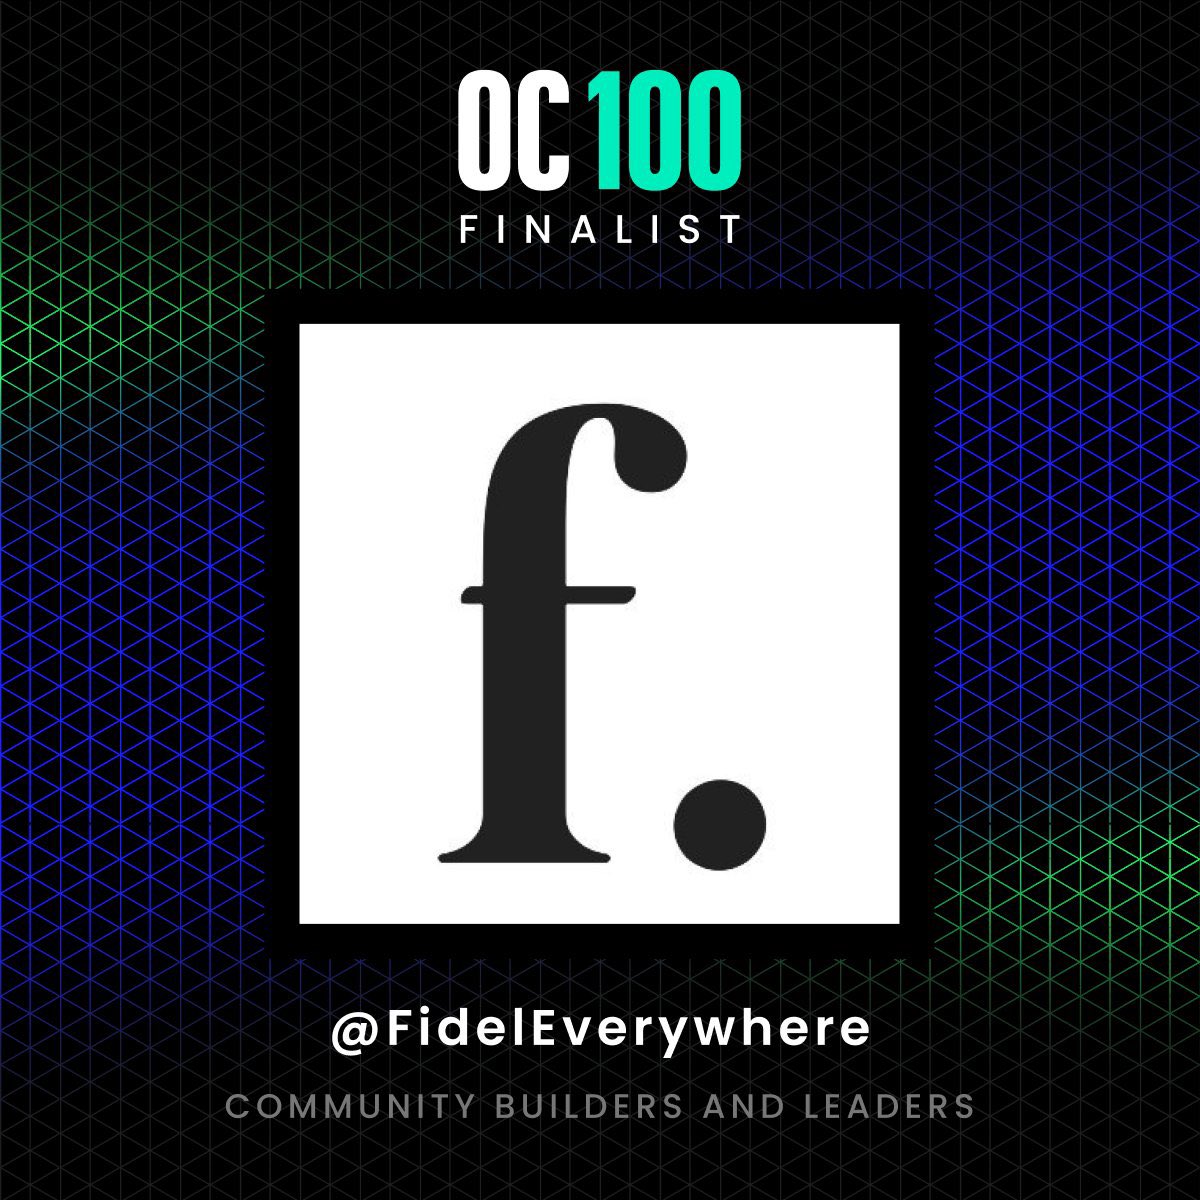 GM gang. Proud to say I’ve been nominated for @opencampus_xyz’s #OC100! @ForbesWeb3 and @animocabrands are searching for the top 100 creators and thought leaders in Web3 and you can help me make that list. Just click the link below to easily setup a profile and vote for me ⬇️